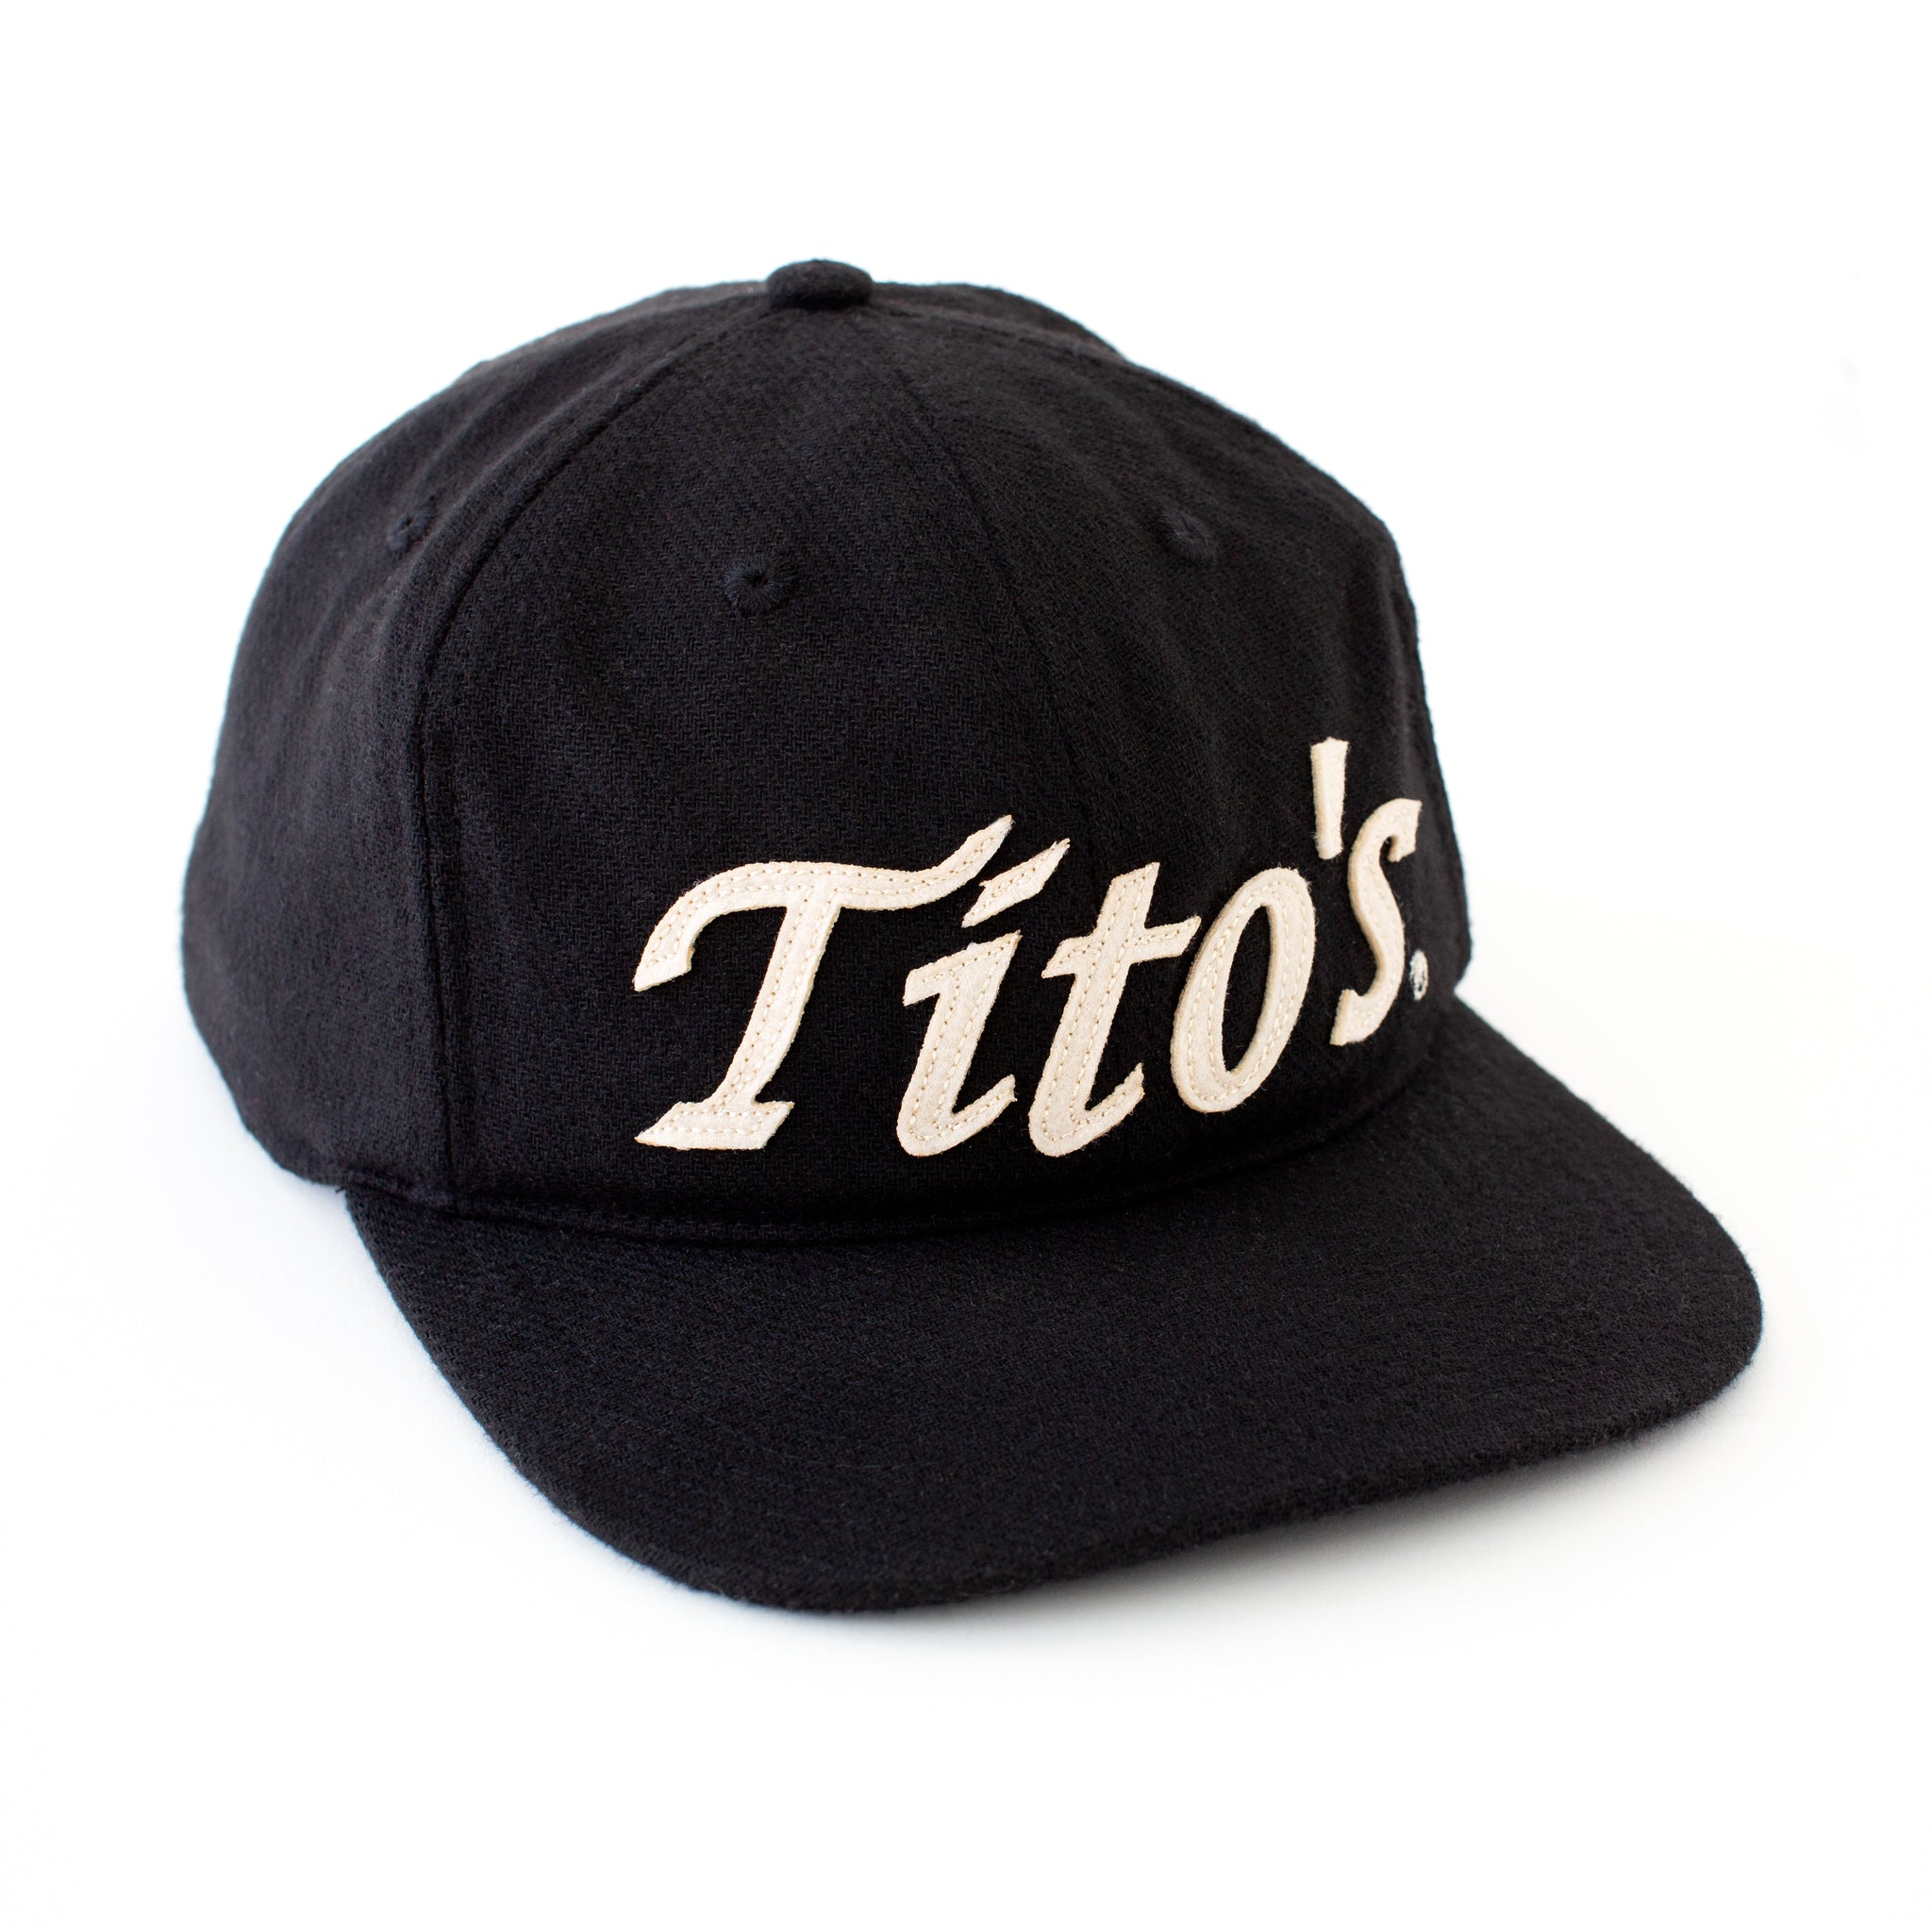 Front view of black wool hat with Tito's wordmark appliqué in creamy white felt